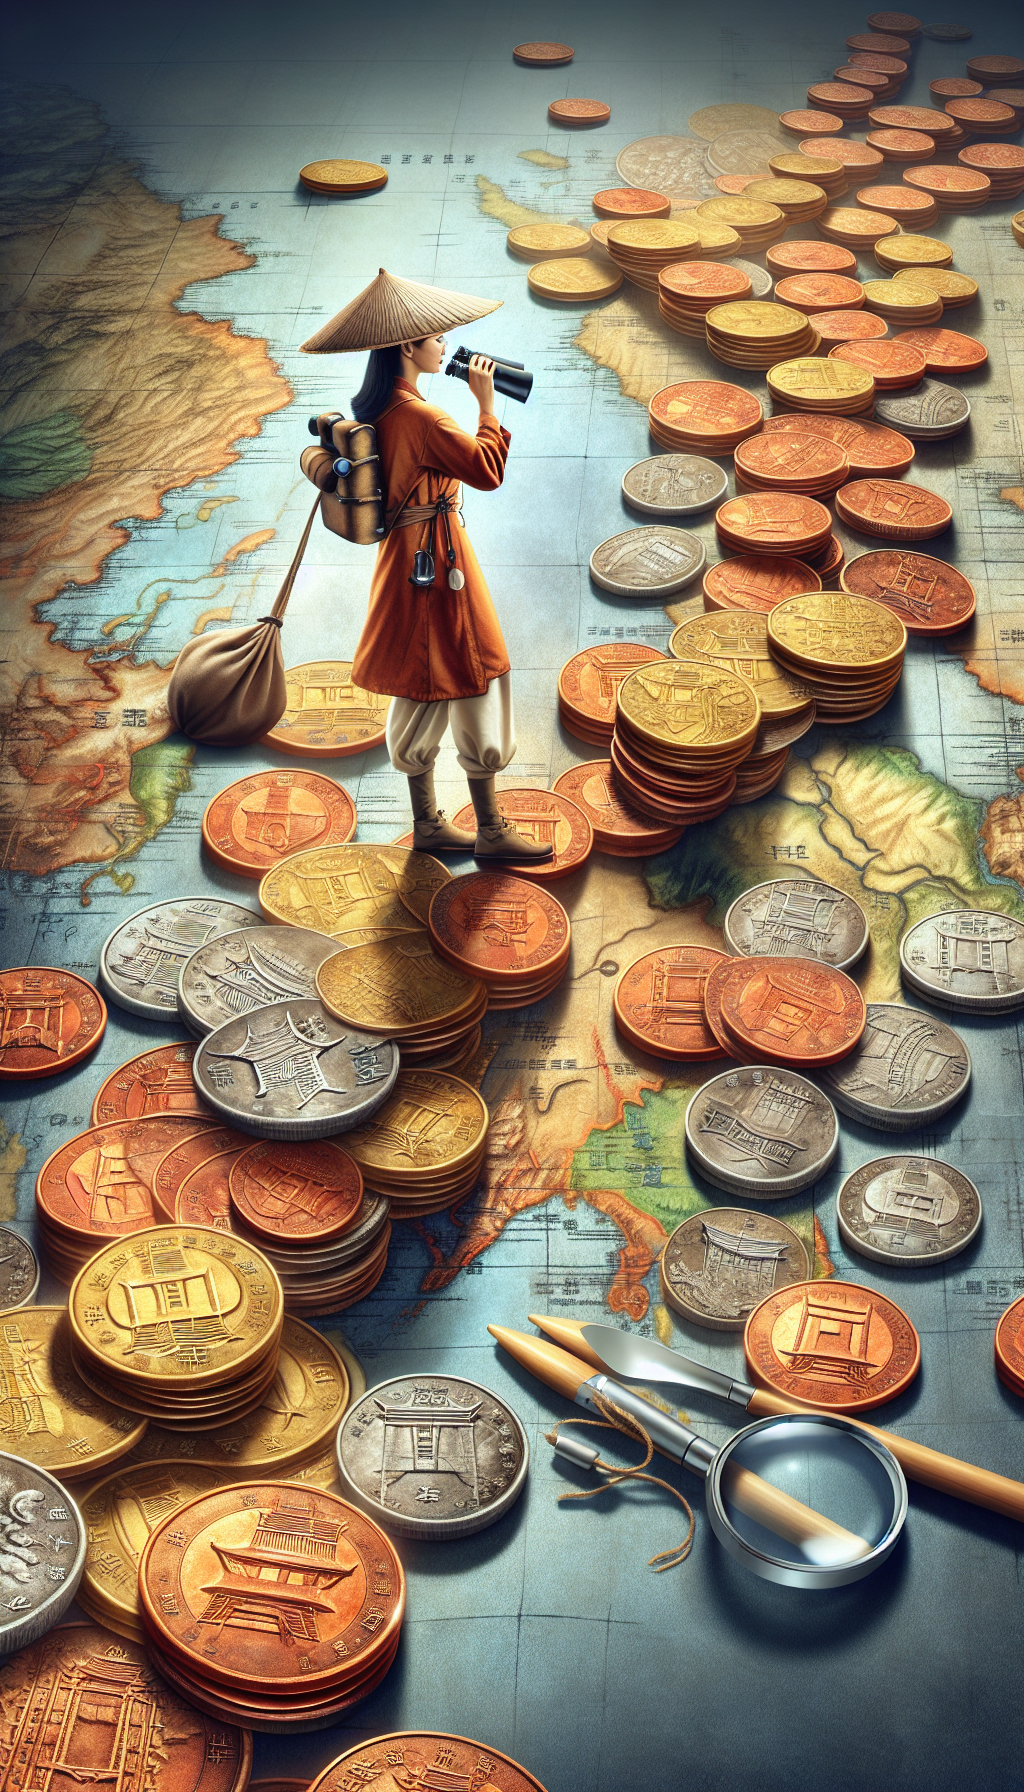 An adventurous figure steps on a metaphorical path of ancient Chinese coins, binoculars in hand and a satchel of magnifying glass and auction paddles. Coins radiate with varying intensity, illustrating their differing values, against a backdrop of a stylized map of China, punctuated with landmarks like the Great Wall and Forbidden City, subtle hints for treasure hotspots.